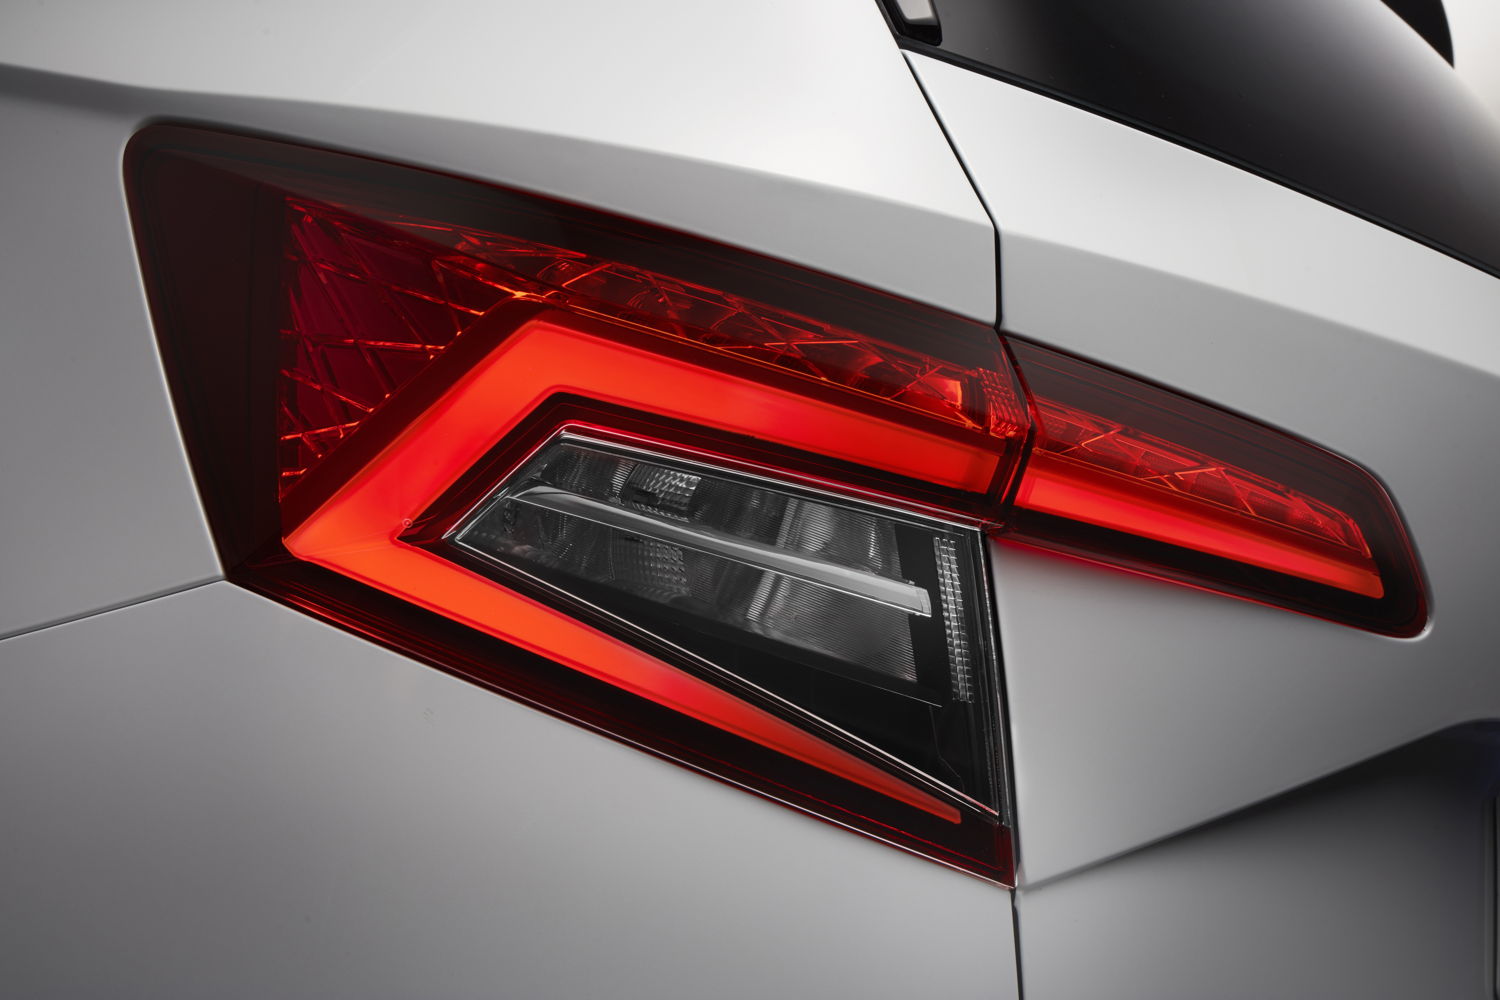 The tail lights with LED technology form the ŠKODA-typical ‘C’ shape. The tail lighting with LED technology includes the rear lights, brake lights and fog lights.